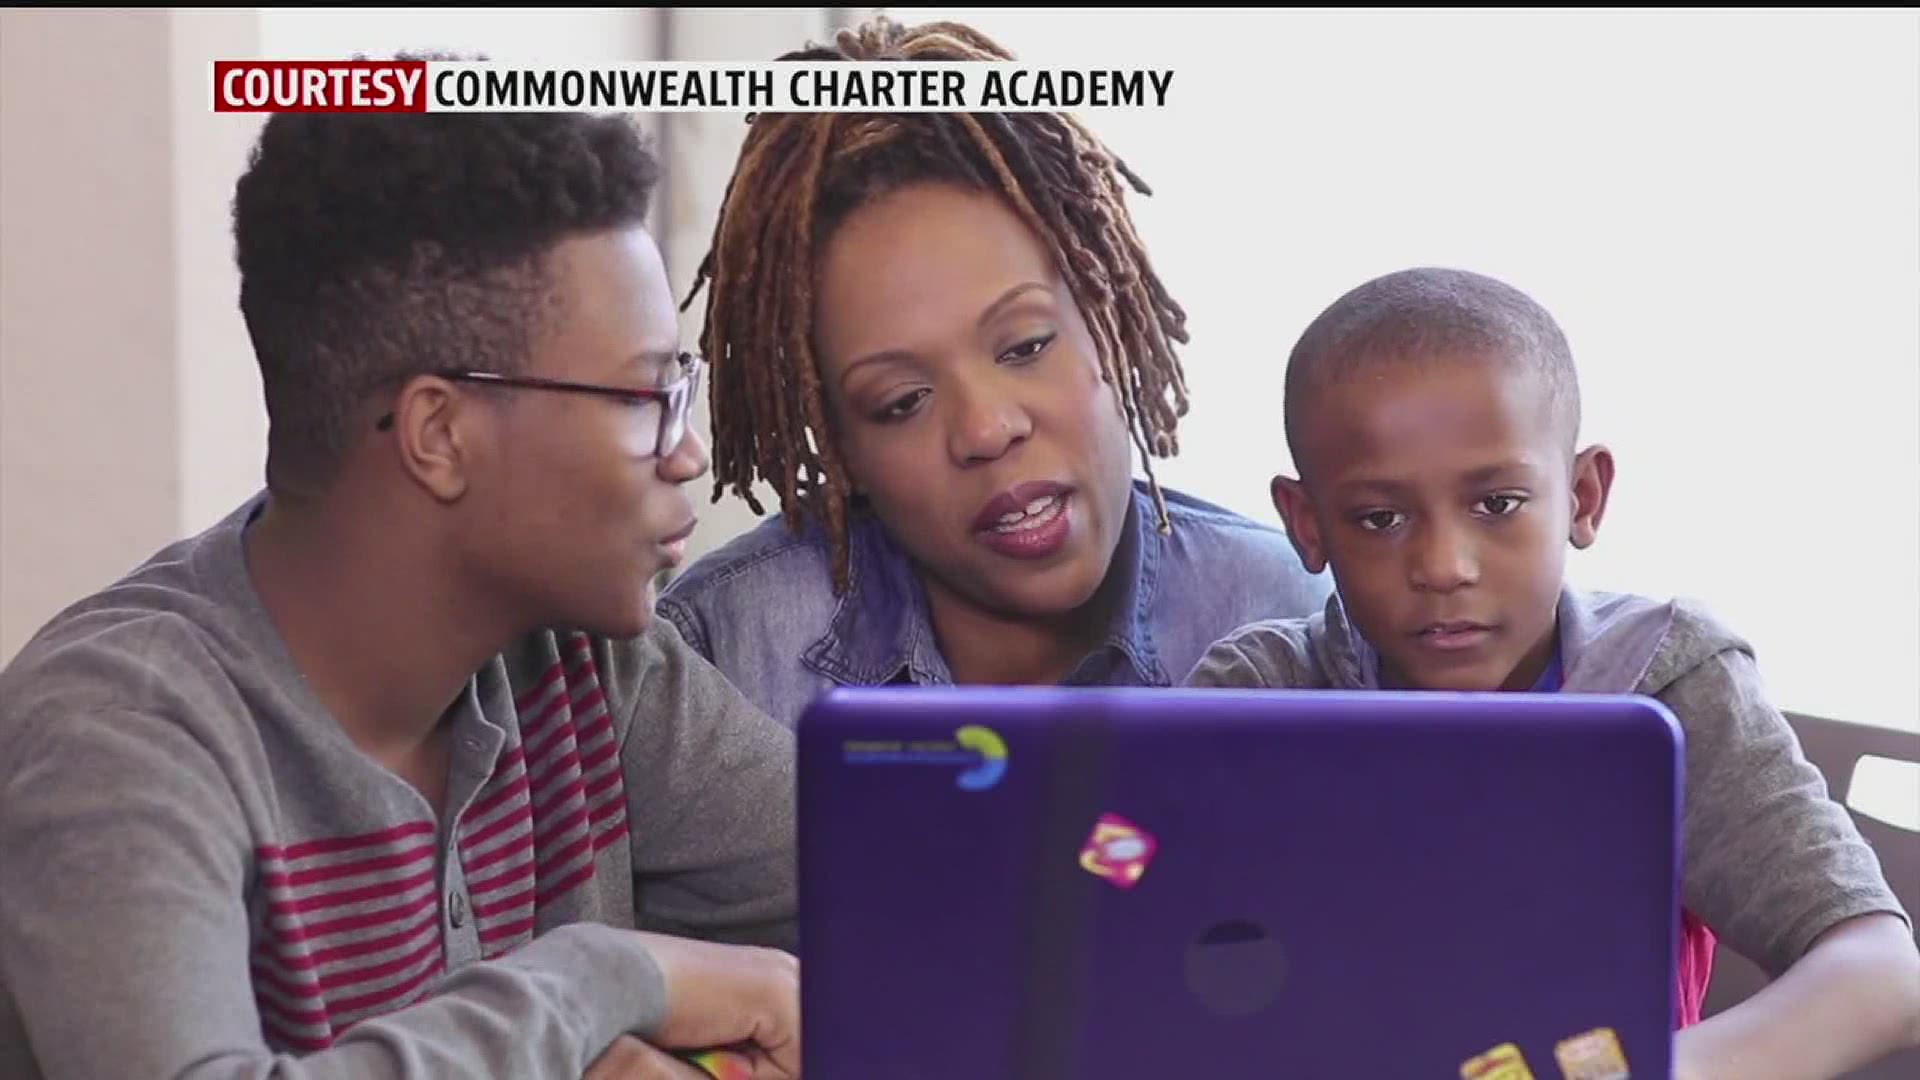 Commonwealth Charter Academy is one of 14 public cyber schools across the state of Pennsylvania